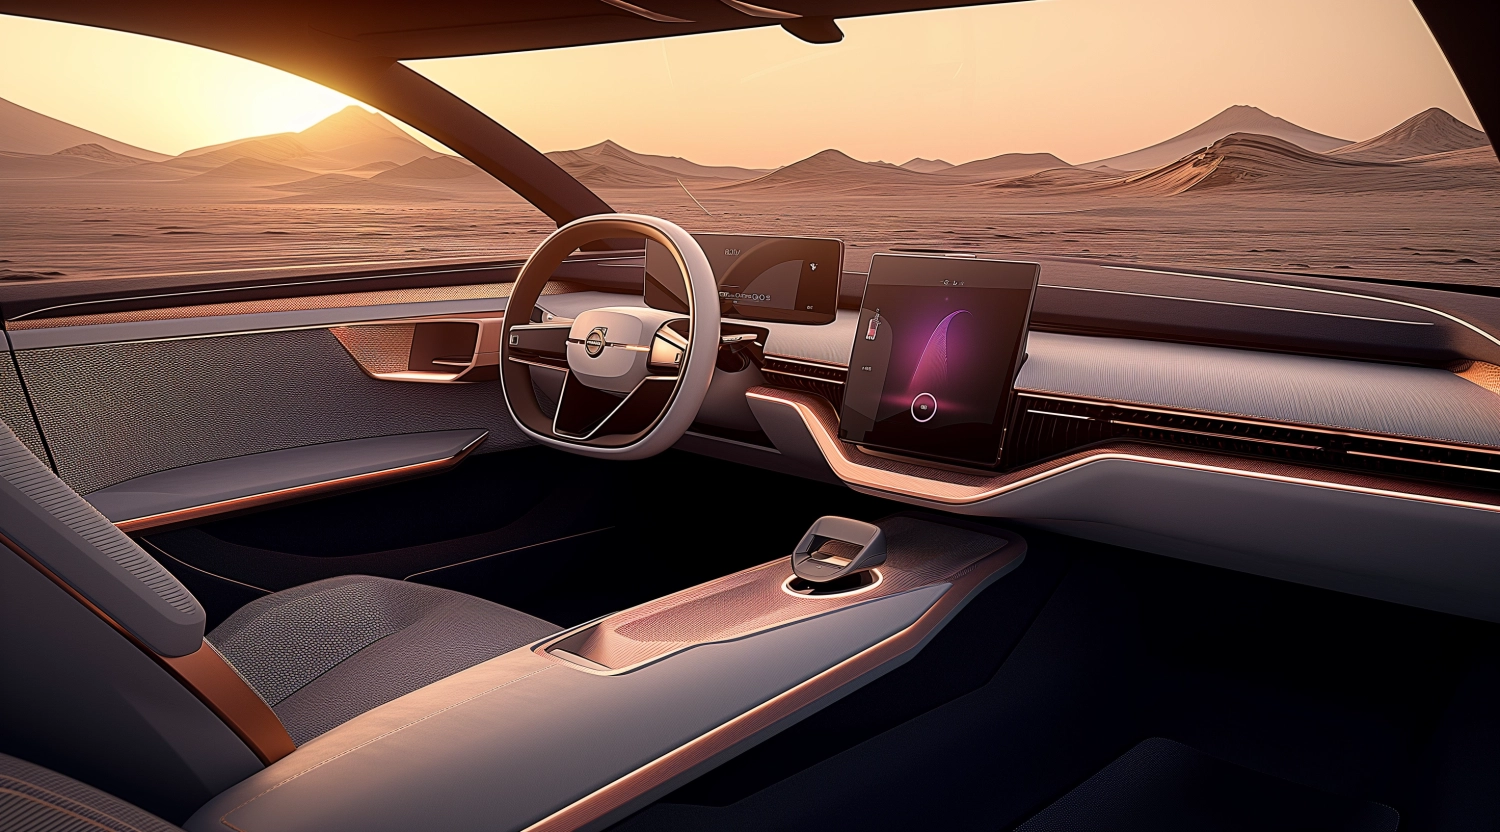 in the style of dark silver and beige, volvo xc90 interior 2d concept dm1, in the style of tonalist skies, jean-joseph benjamin-constant, 32k uhd, light orange and navy, atmospheric scenes